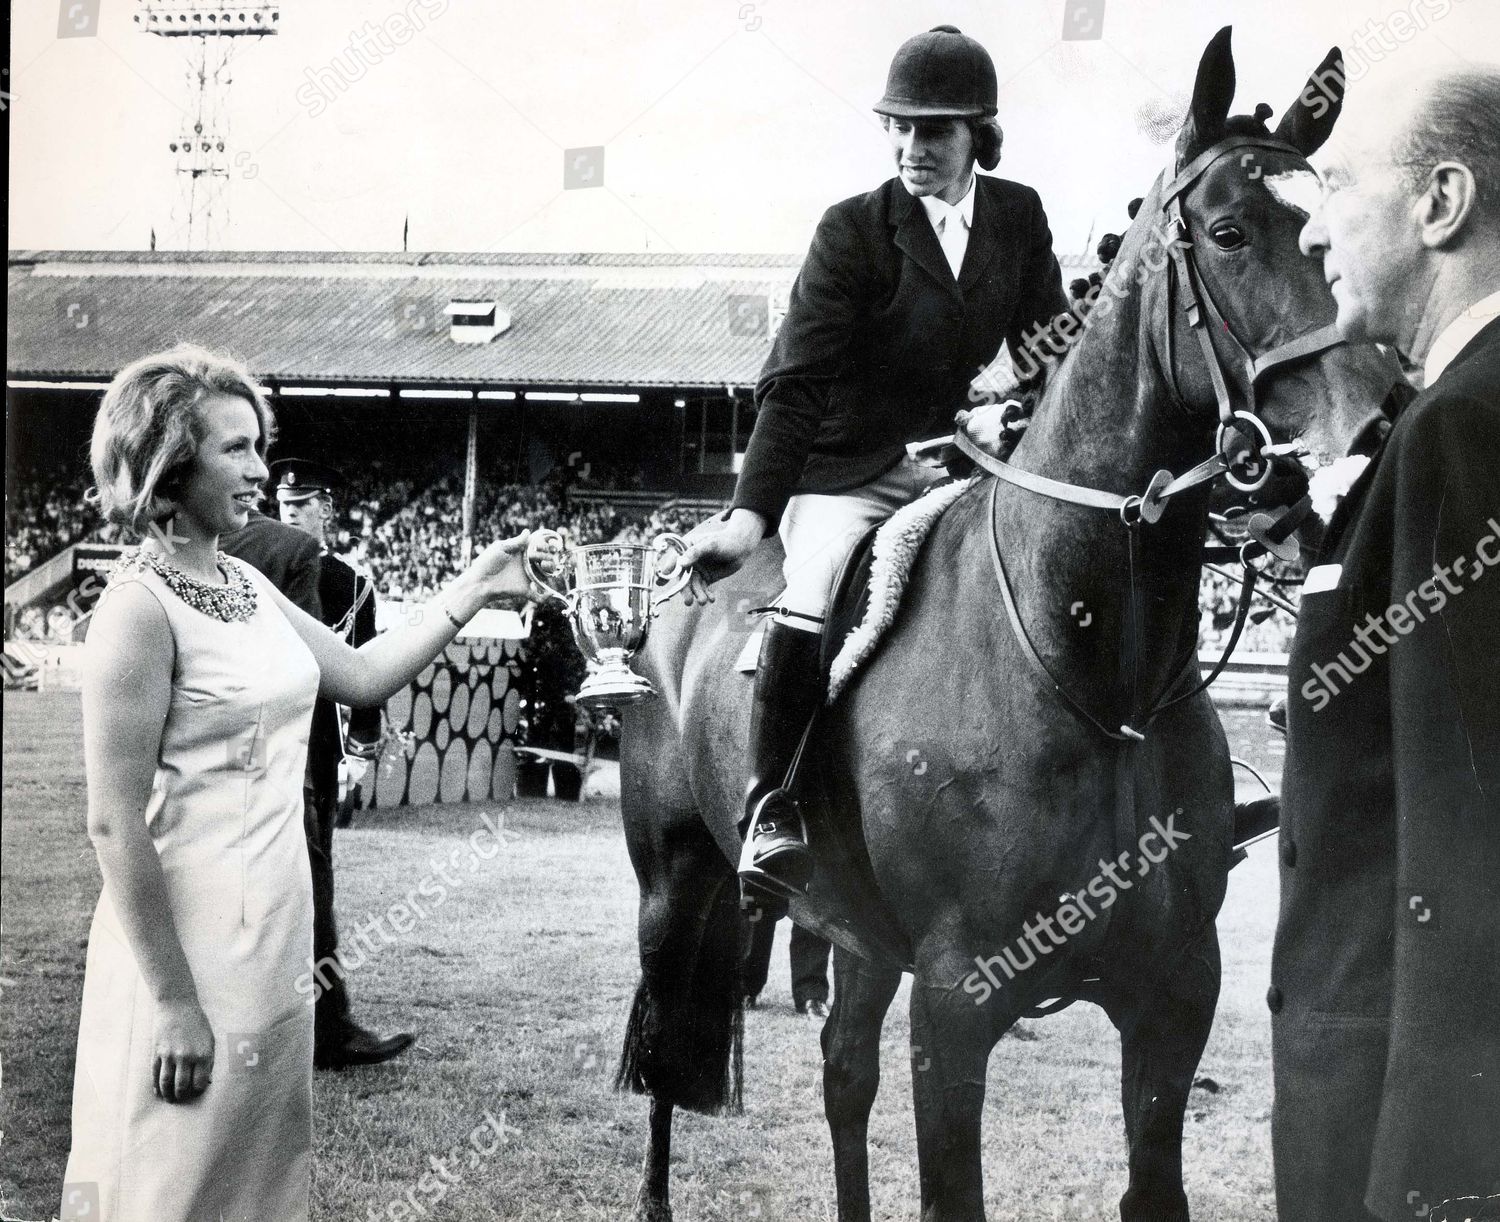 princess-anne-now-princess-royal-july-1967-july-1967-betty-jennaway-looks-on-from-the-saddle-as-princess-anne-attaches-the-victory-rosette-to-her-horse-grey-leg-betty-and-grey-leg-had-just-won-the-queen-elizabeth-ii-cup-at-the-royal-international-shutterstock-editorial-890805a.jpg